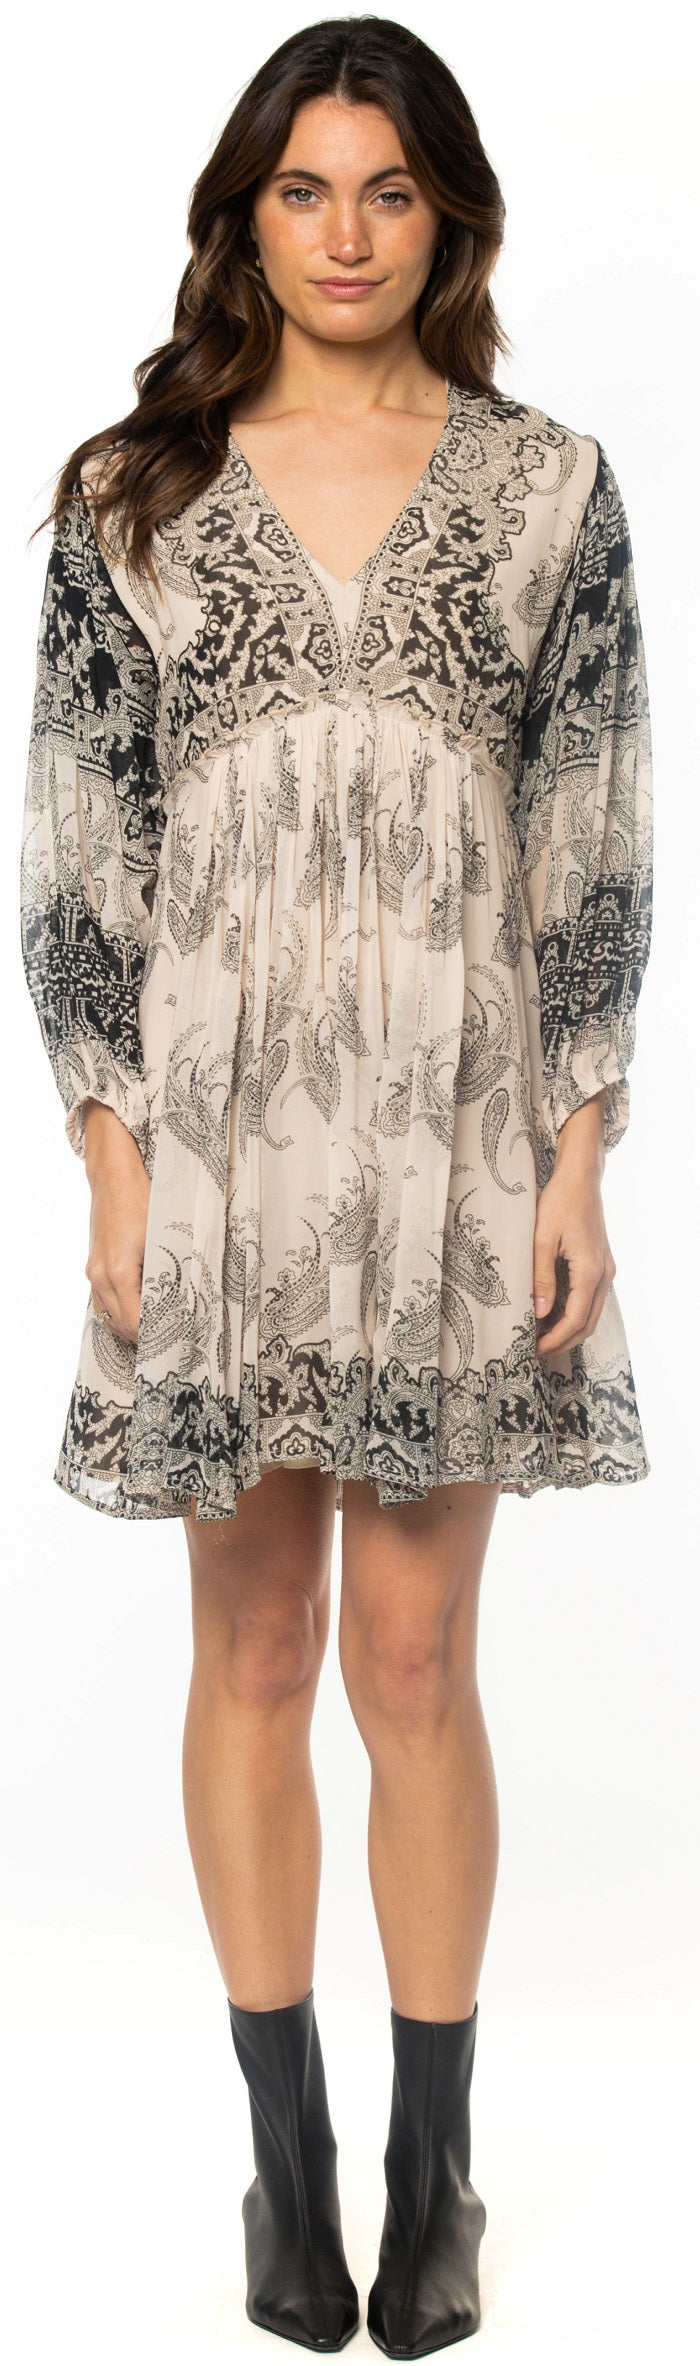 KYRA DRESS - ANGEL - Kingfisher Road - Online Boutique